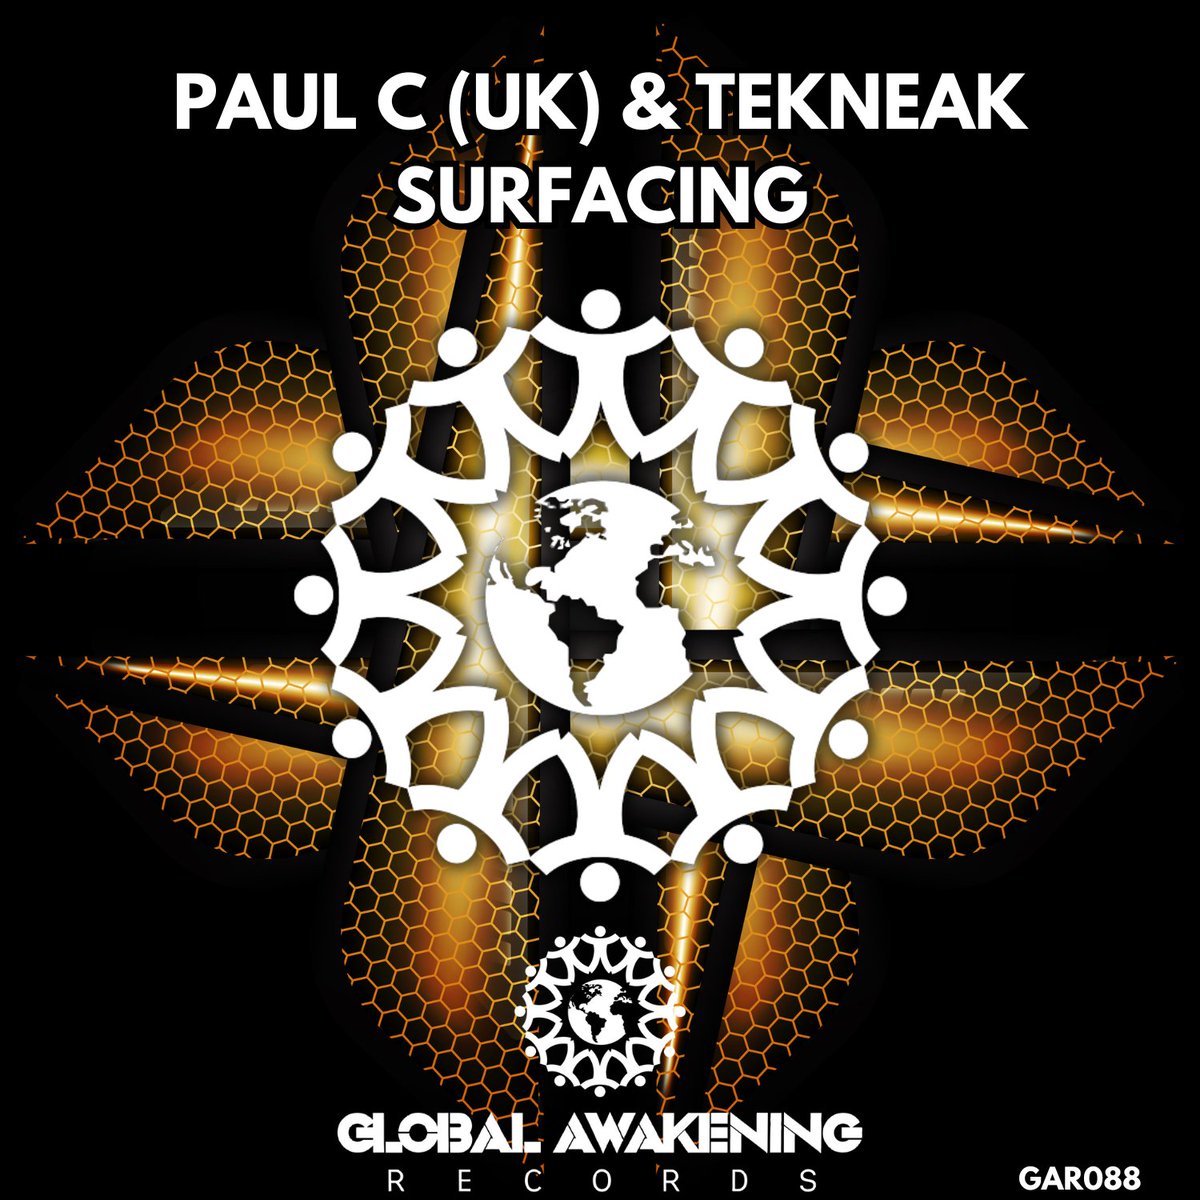 The latest Global Awakening Records release 'Surfacing' from Paul C and Tekneak is an absolute cracker!

Check it out here along with the labels other releases:
bit.ly/surfacinggloba…

#hardhouse #harddance #toolboxdigital #newrelease #newmusic #globalawakeningrecords